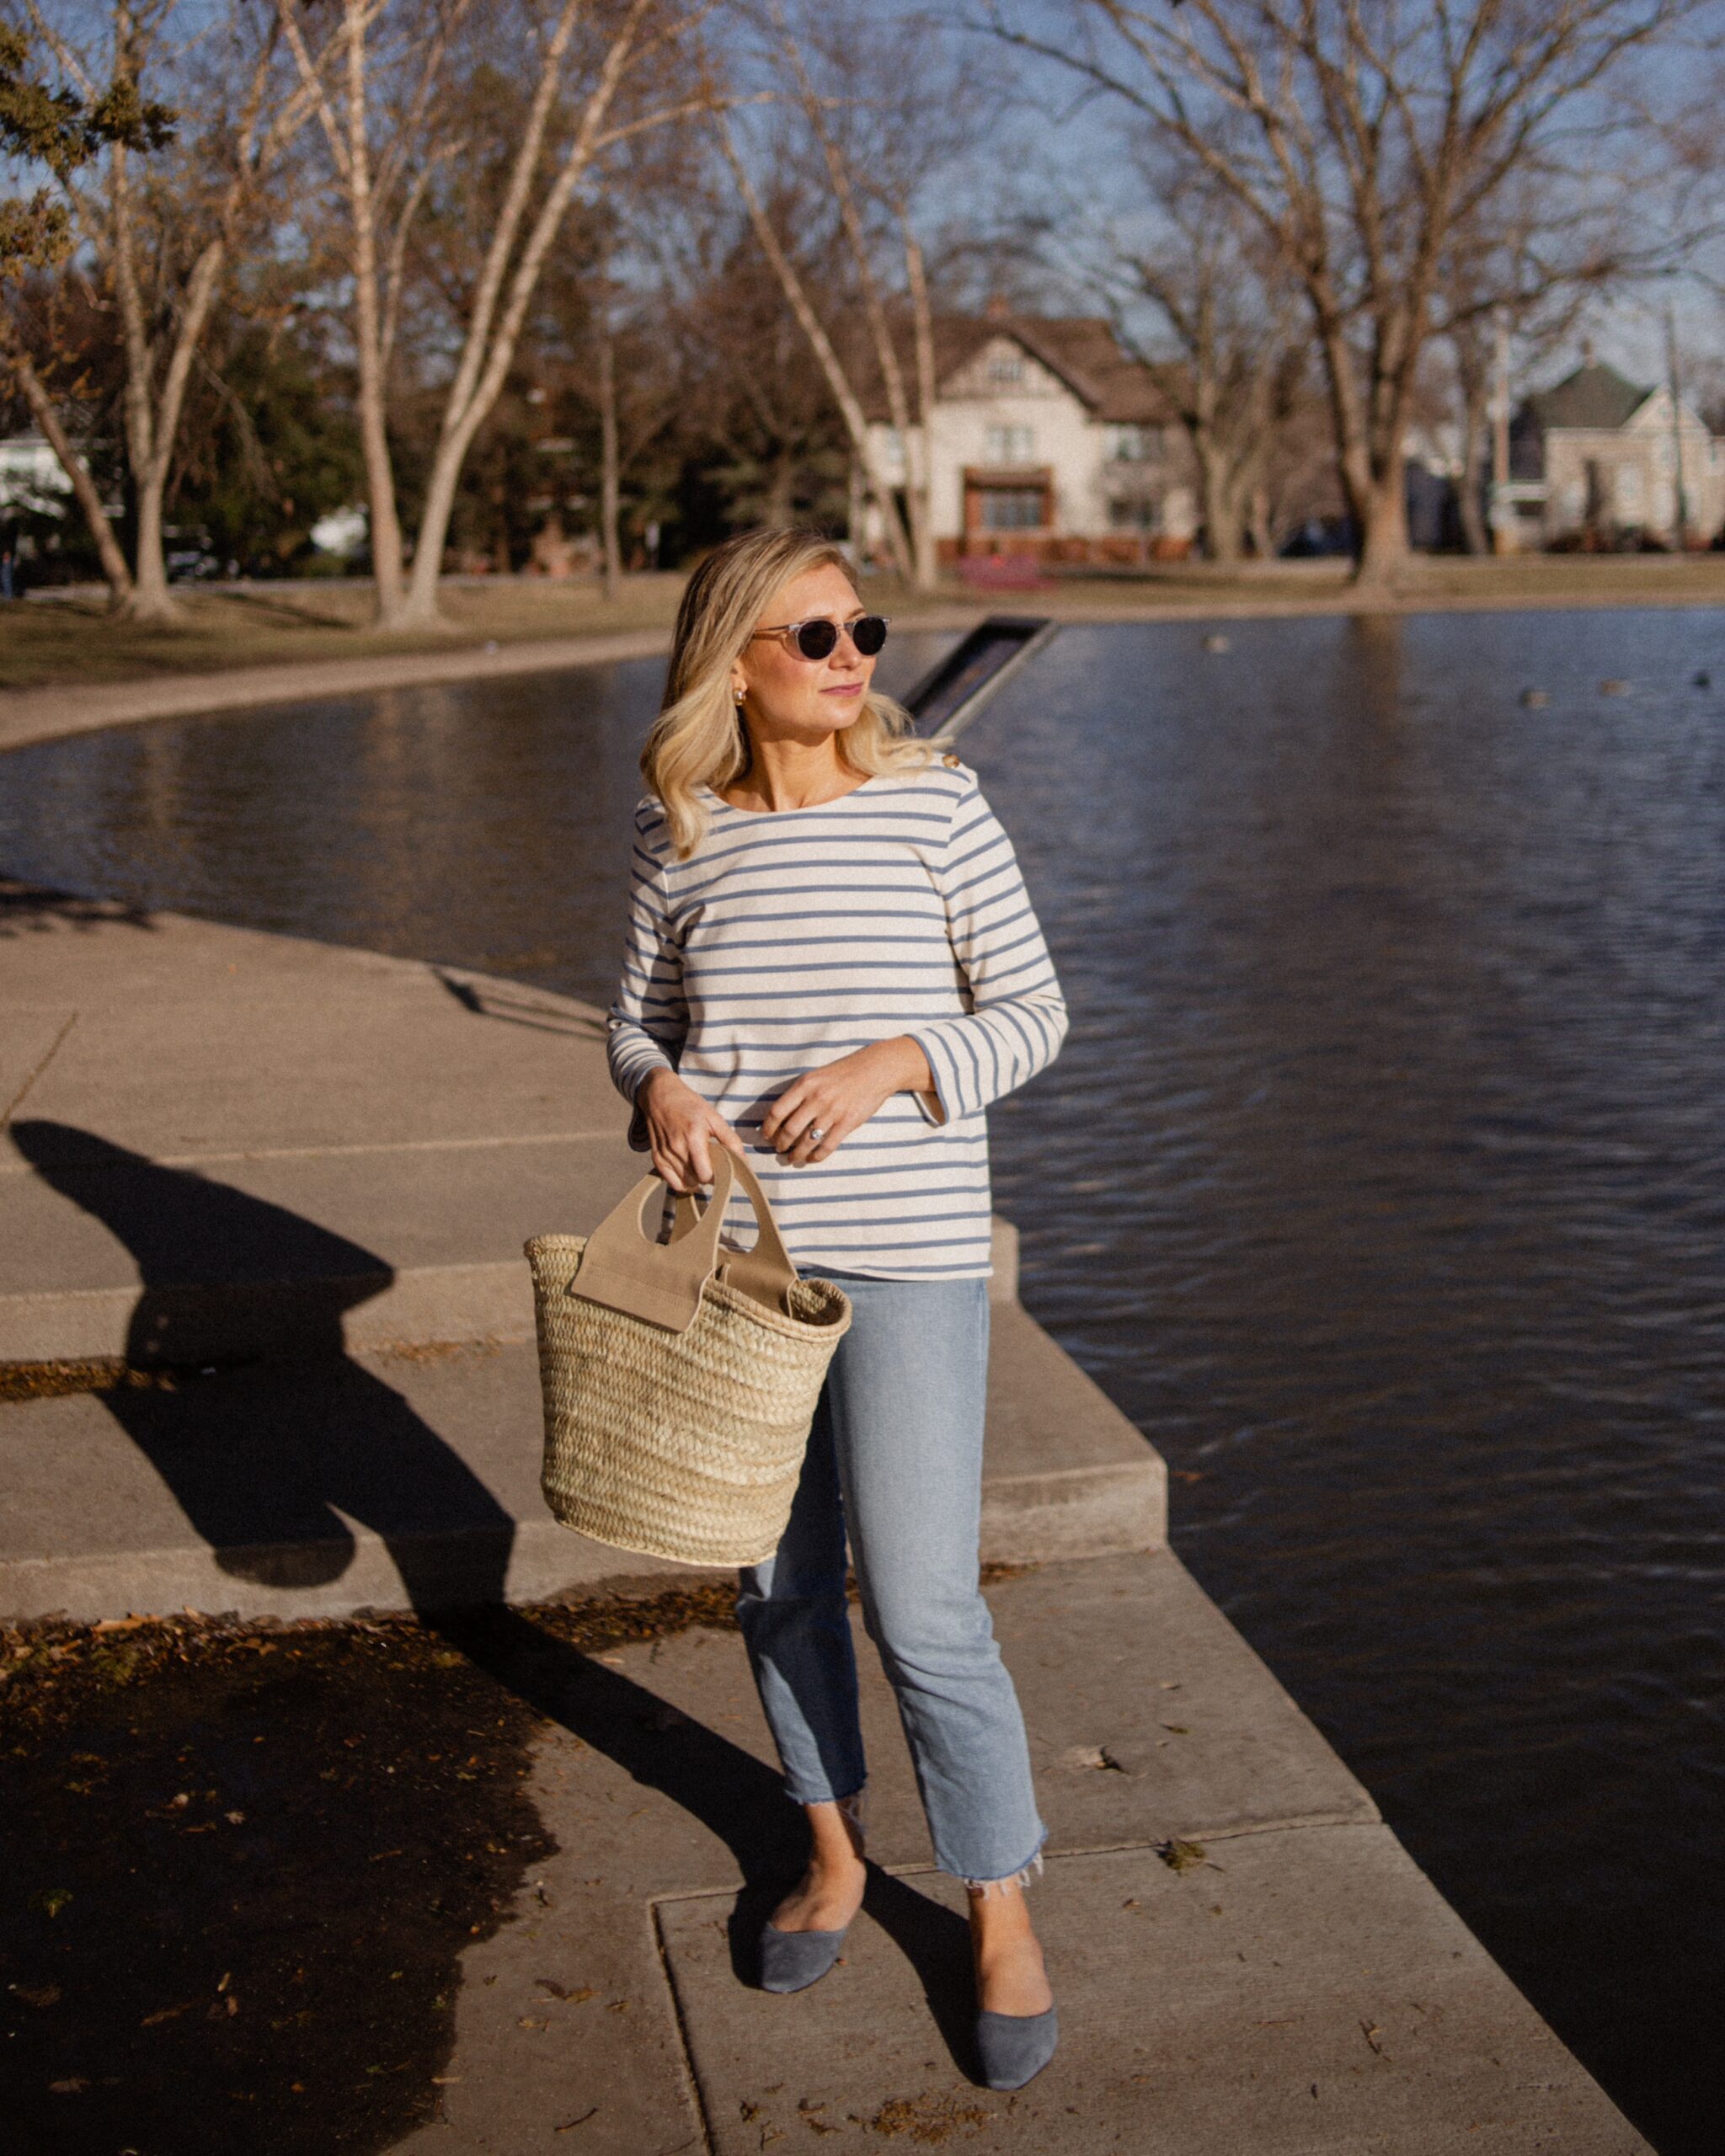 Karin Emily wears Breton stripes from Sezane with a pair of light wash stovepipe jeans from re/done and blue suede mules from Jack Erwin and a basket bag from Hereu